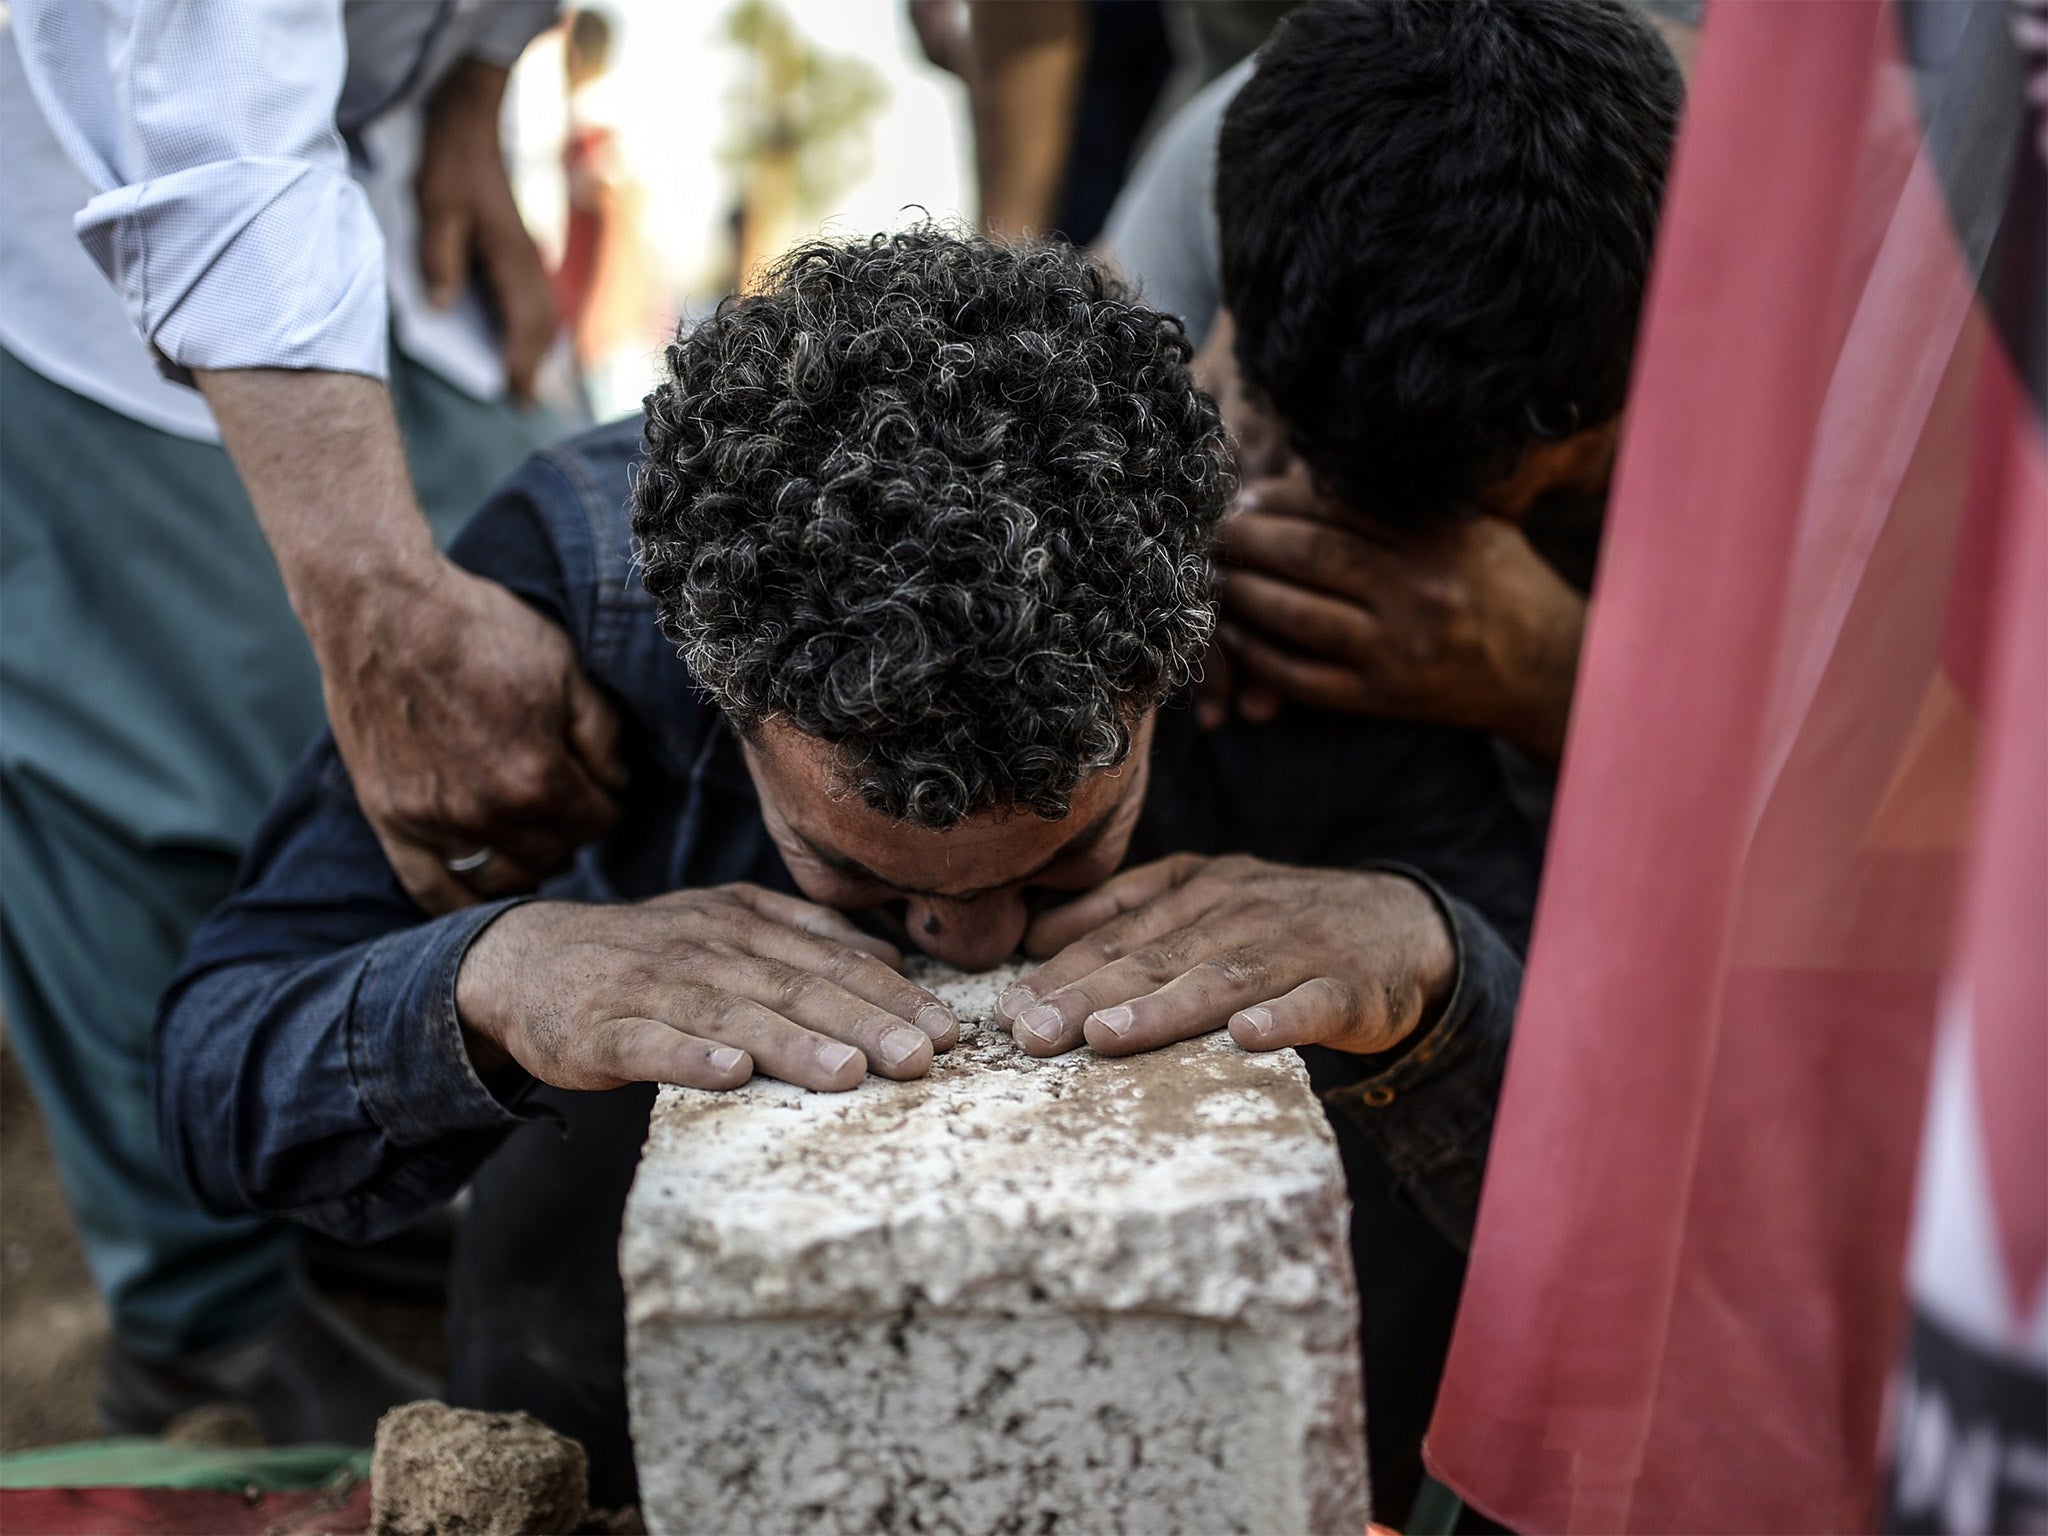 A man mourns during the funeral ceremony for victims of the suicide bomb attack in Suruc